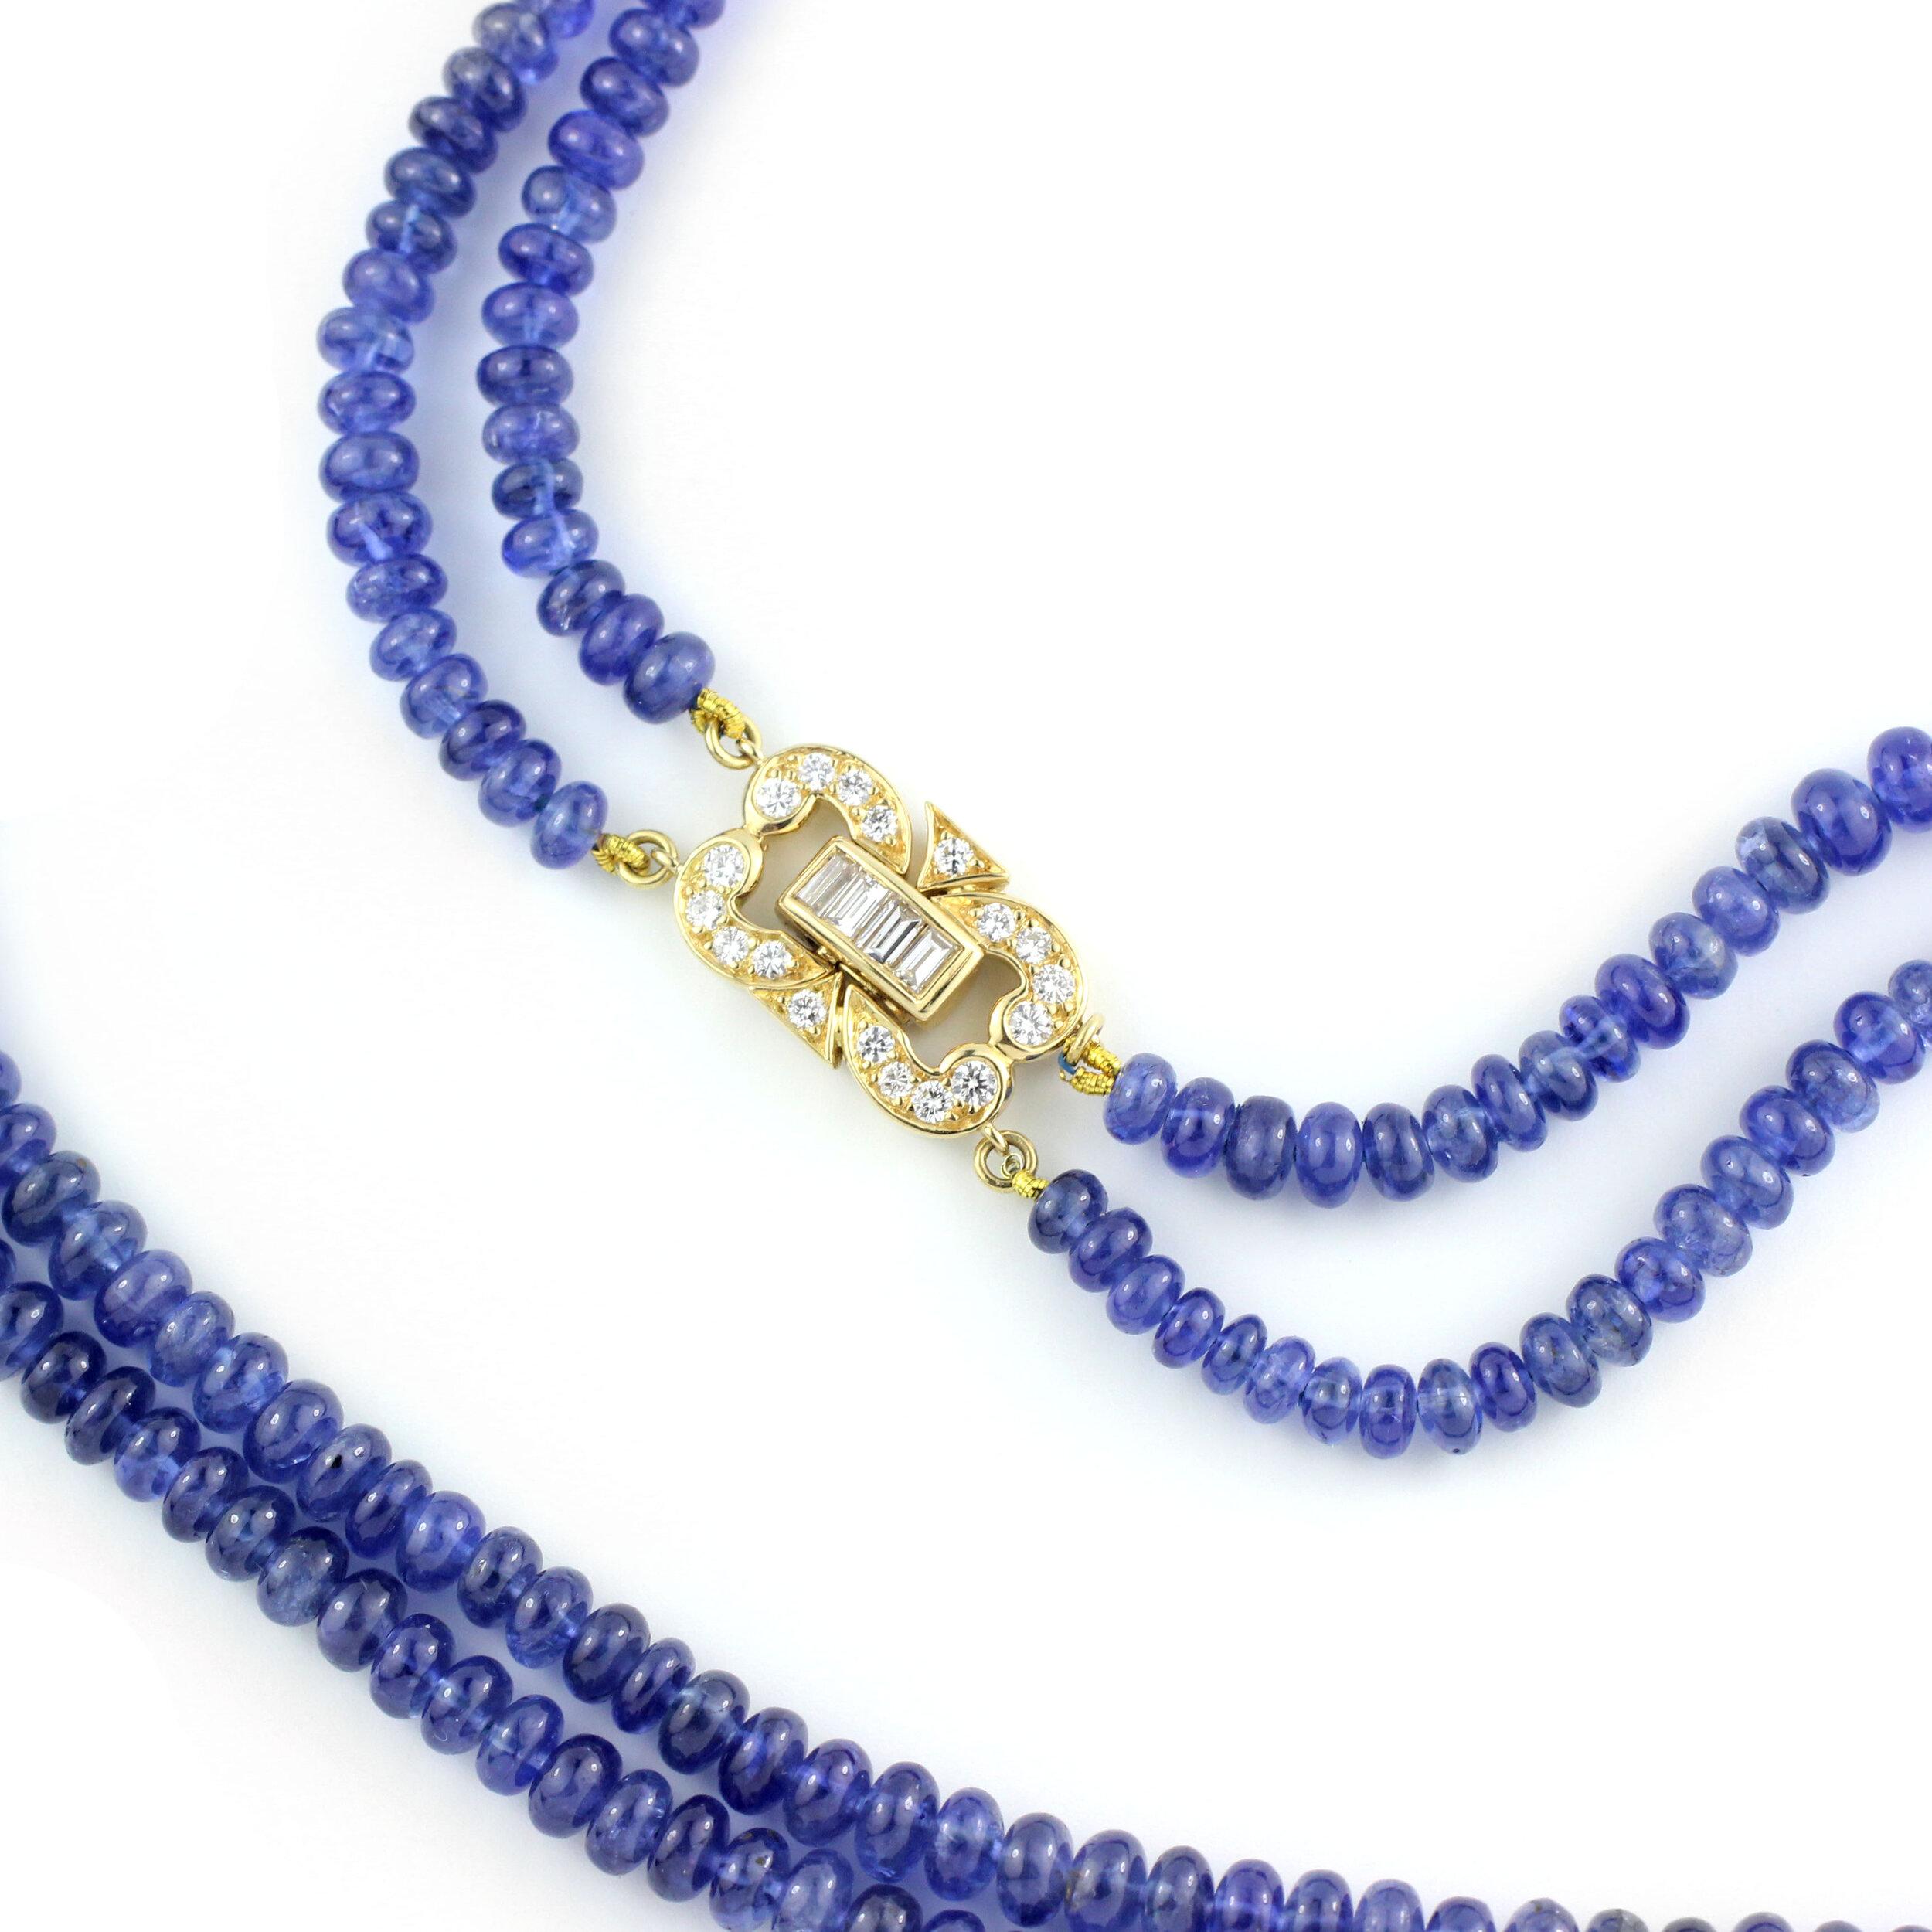 Cabochon Sapphire Bead Necklace with 18Kt Gold & Diamond Clasp

Containing 293 beautiful blue Nested Sapphire Beads (170.74 Cts.) with a classic 18 Kt Gold and brilliant Diamond Clasp (22 diamonds, .58 Cts.).  16” Long.

Made in New York.